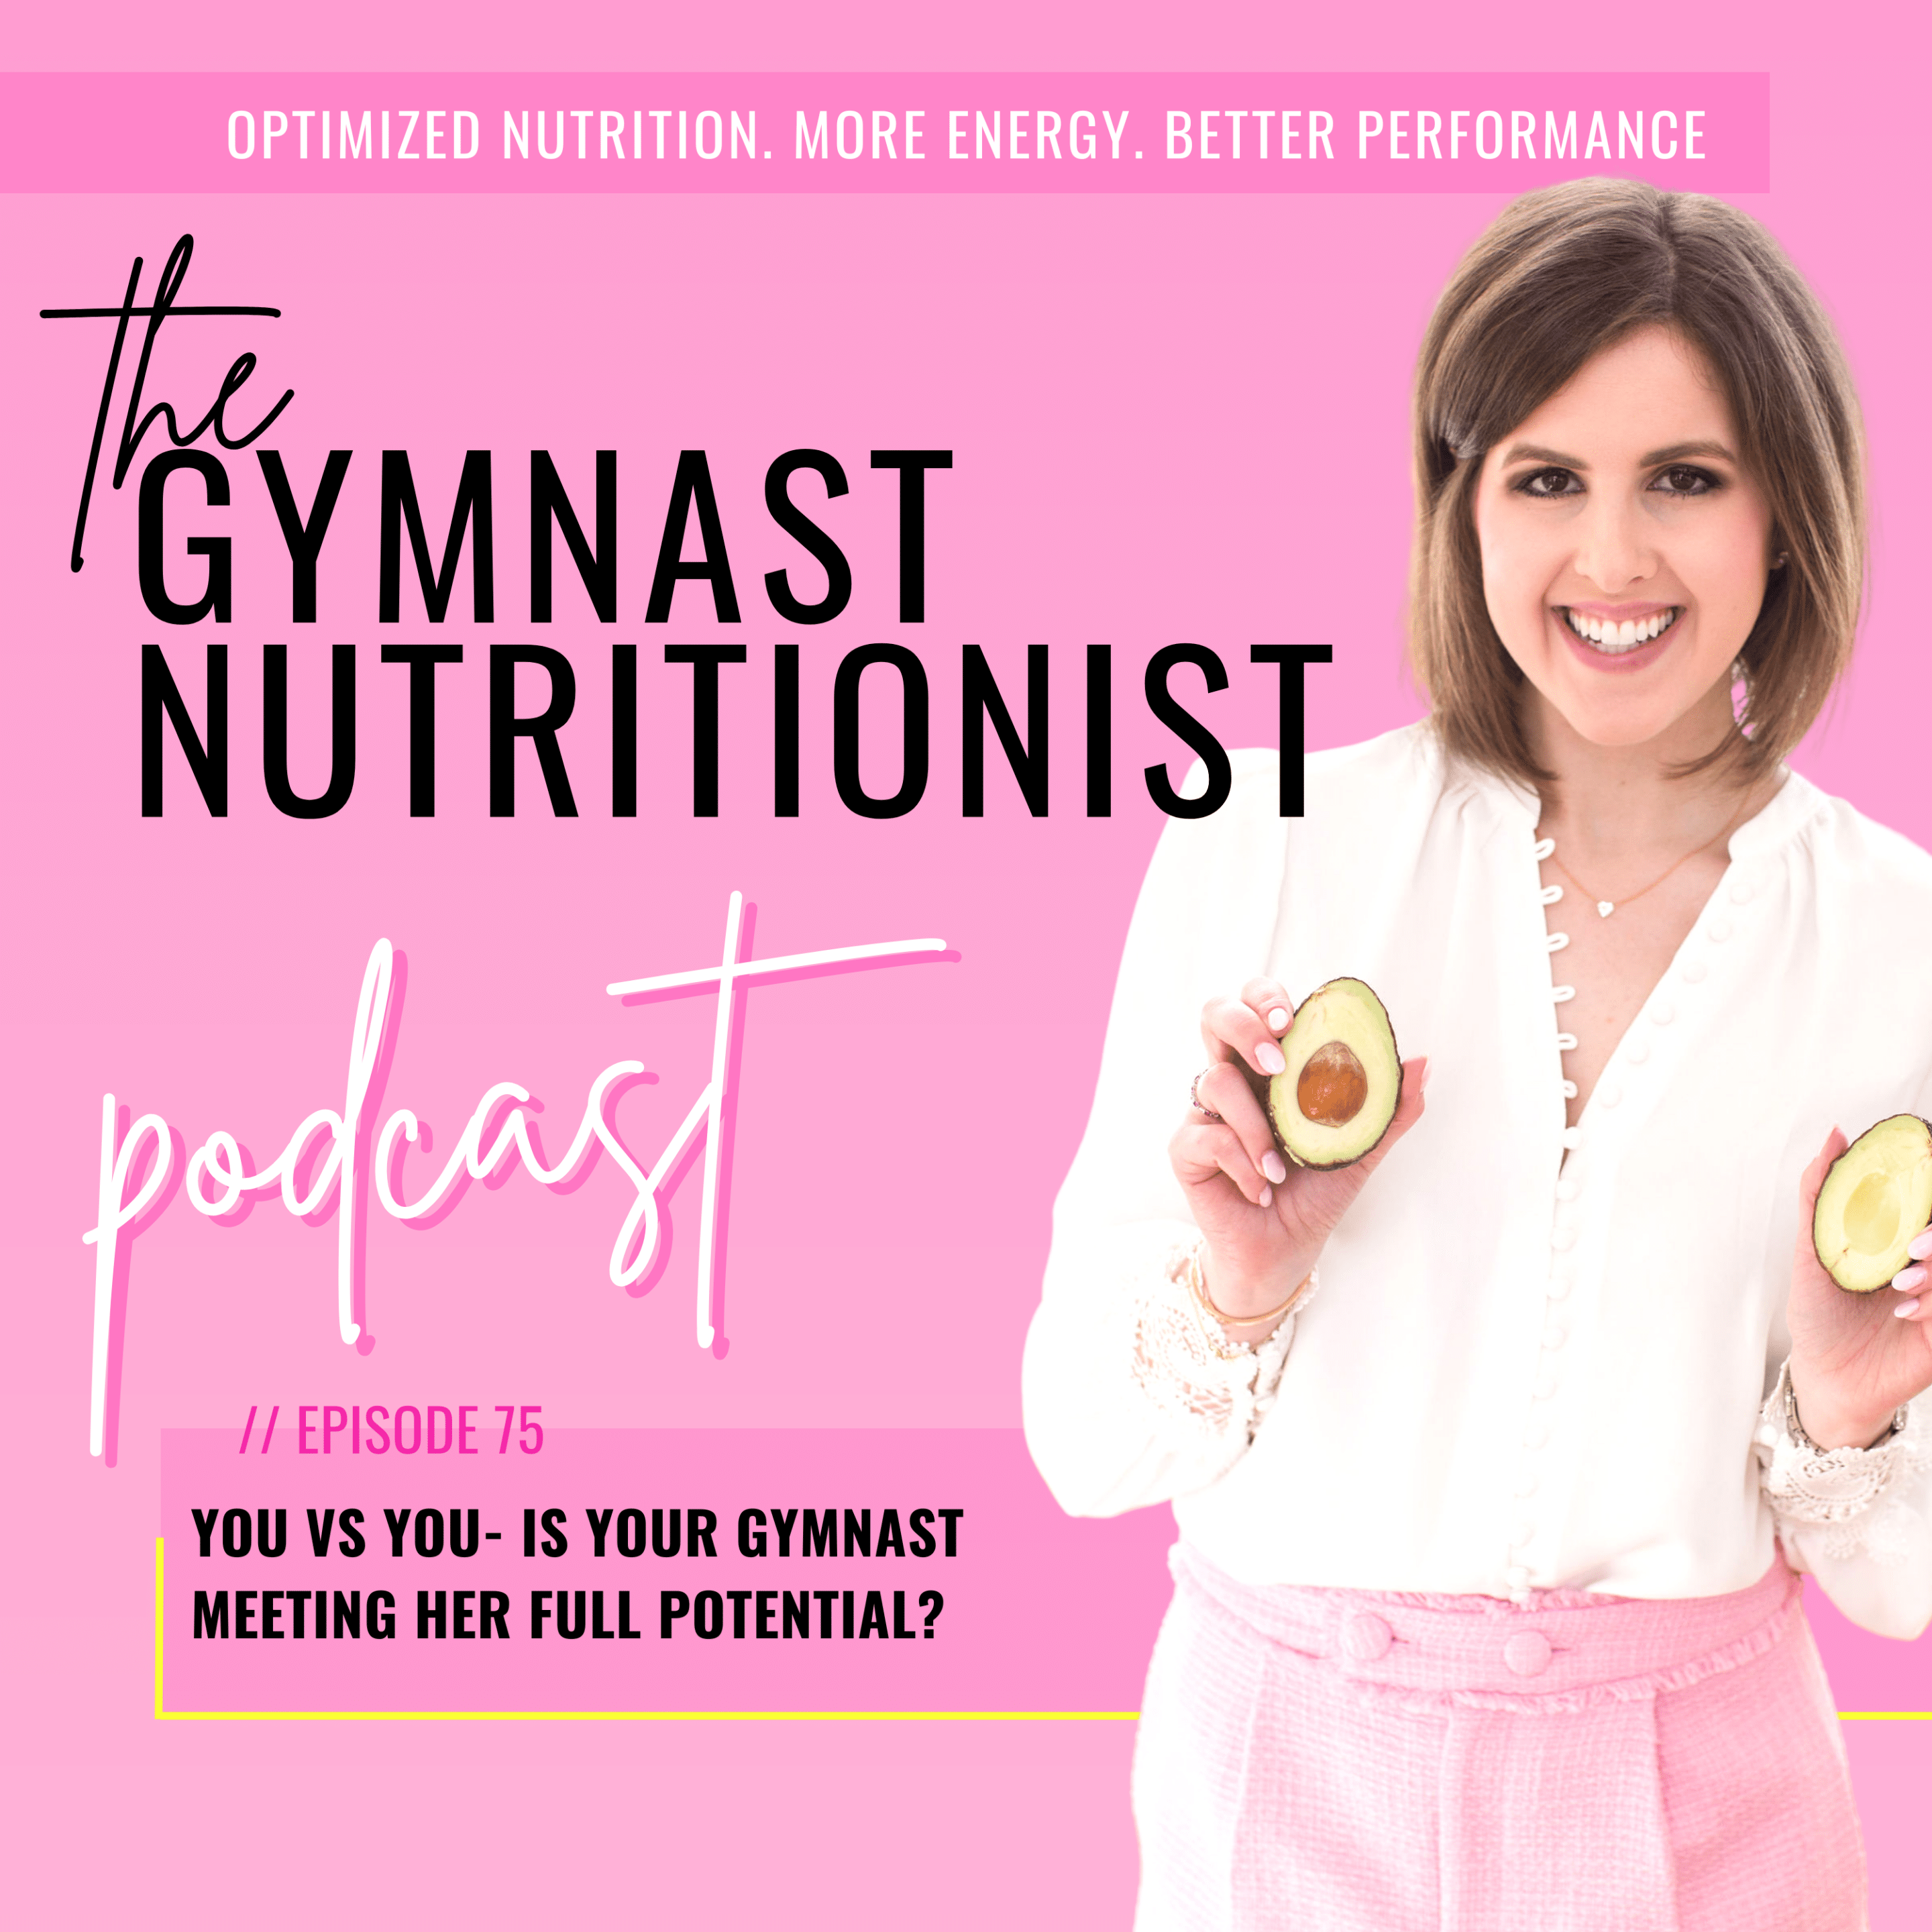 Episode 75: You vs You- Is your gymnast meeting her full potential?